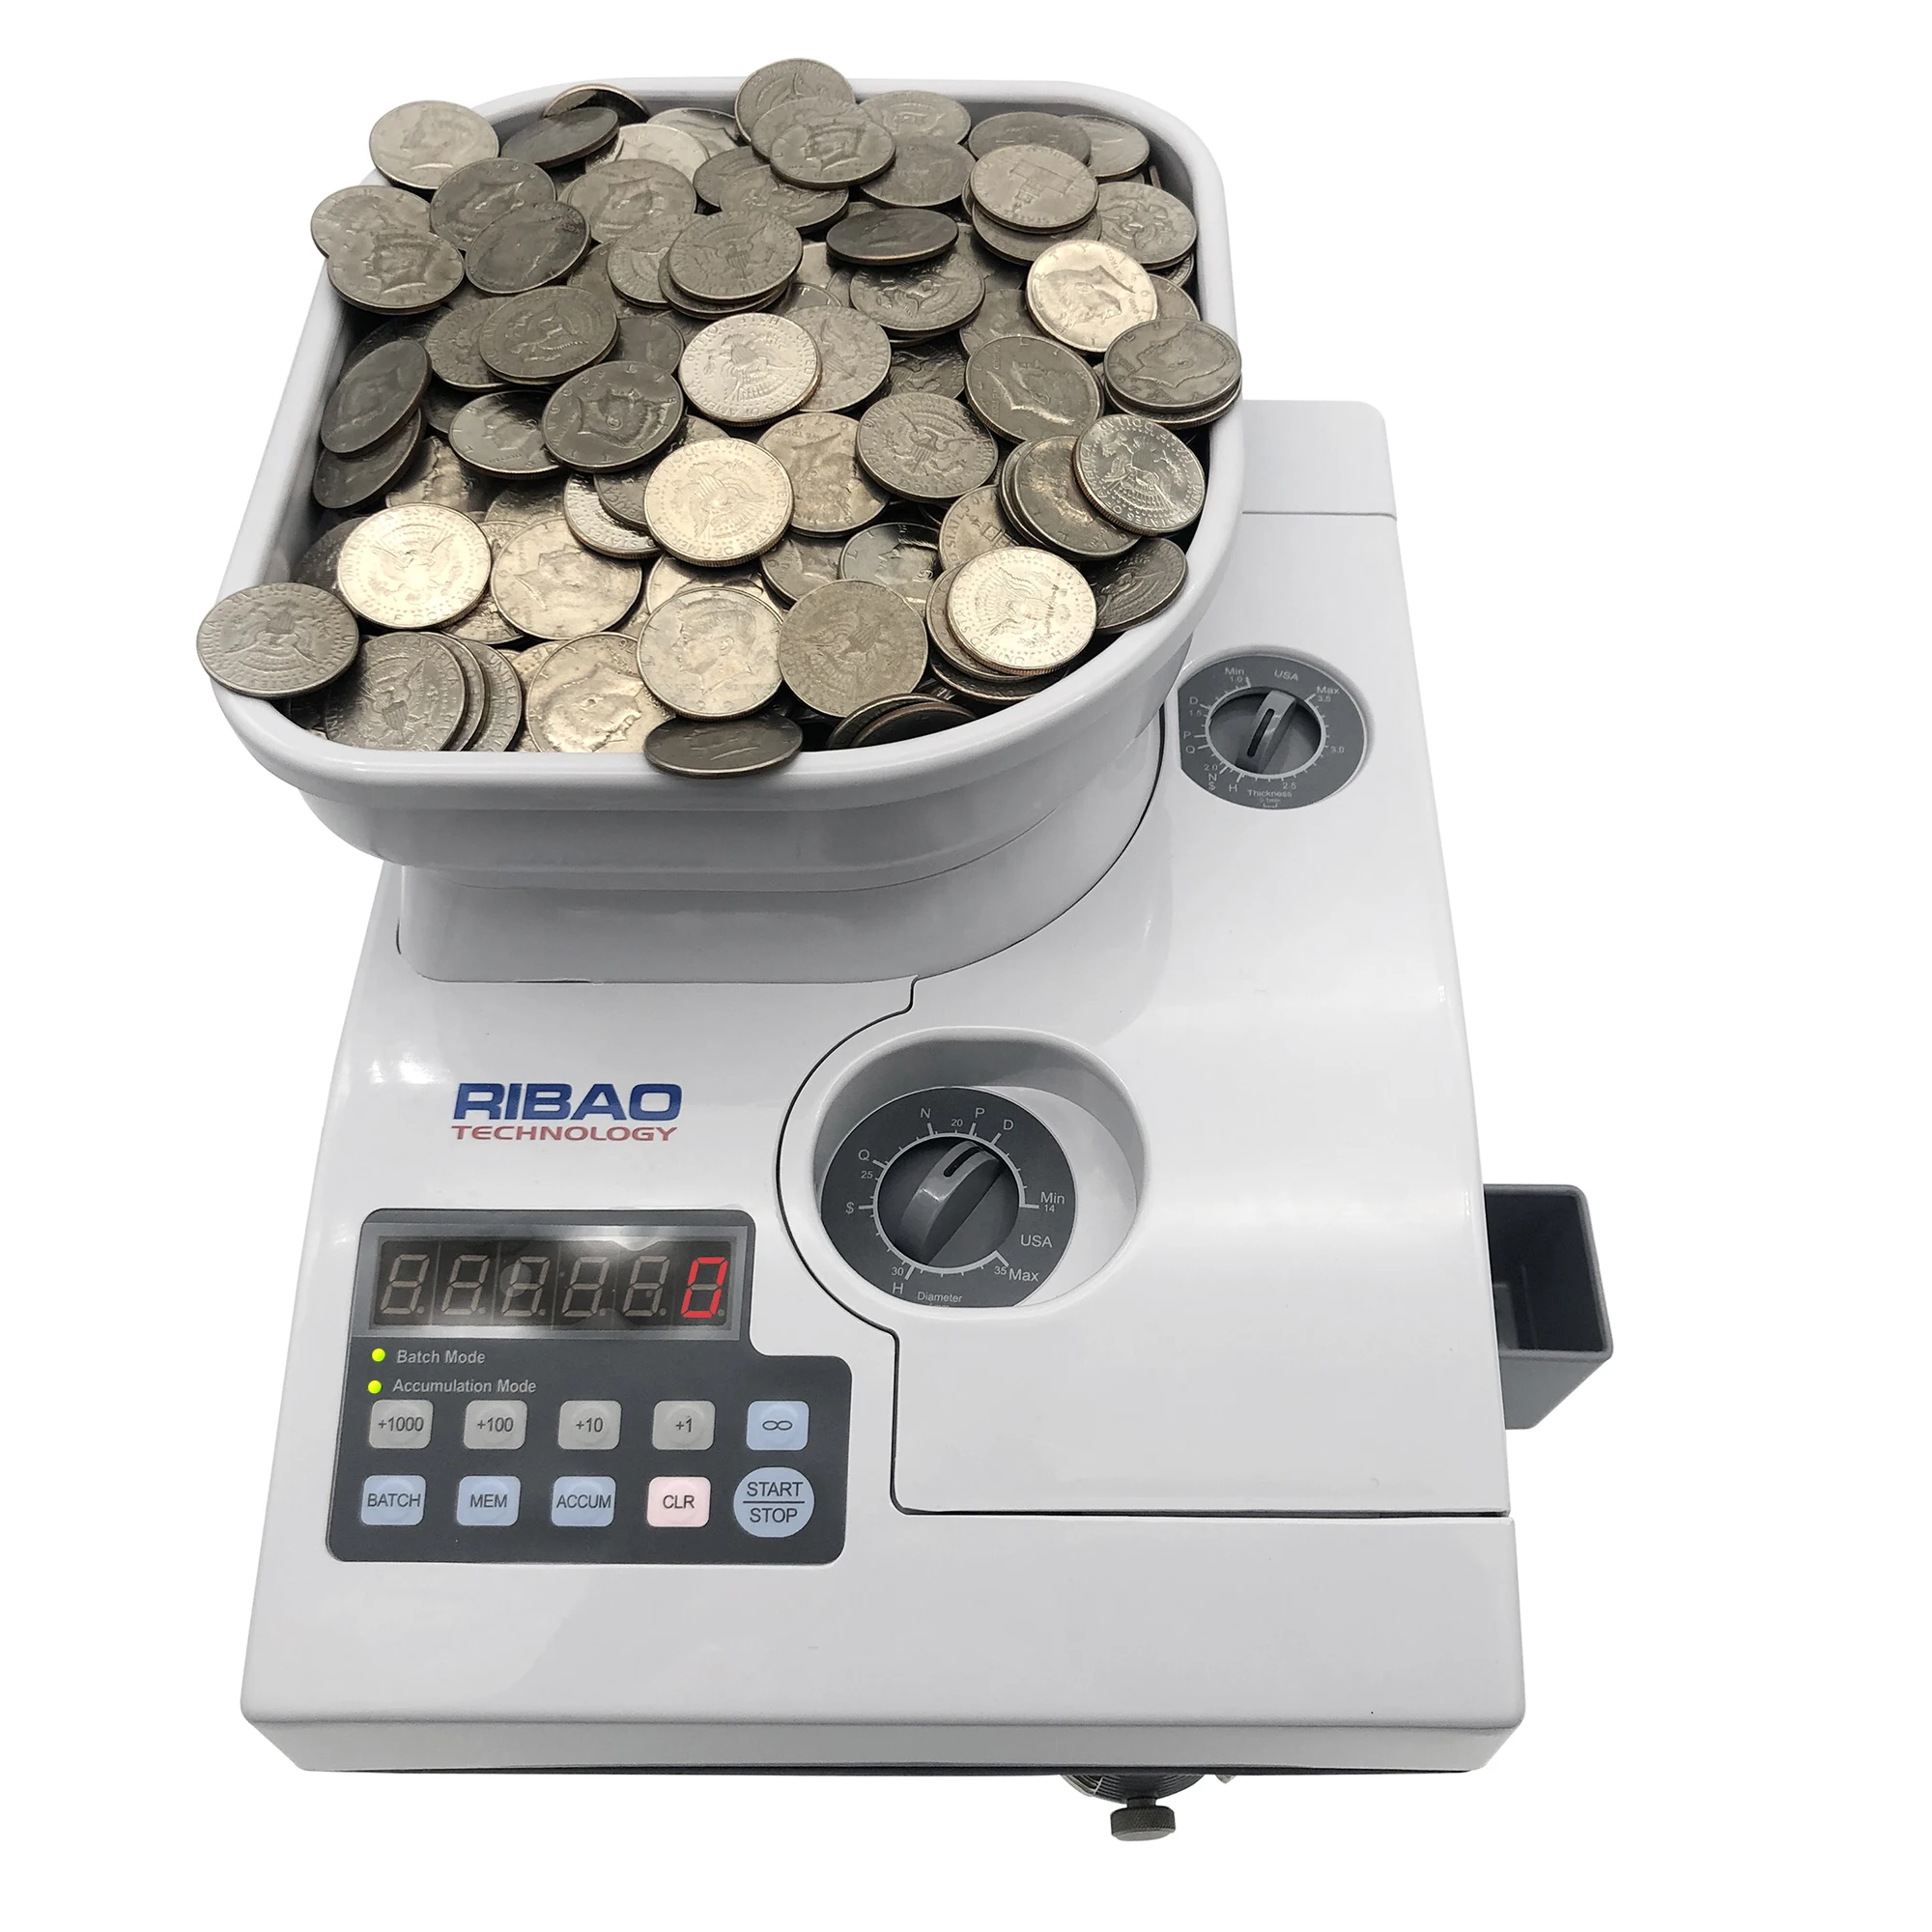 

RIBAO Coin-Mate CS-2000 Heavy Duty Coin Counter and Sorter with Large Hopper Capacity